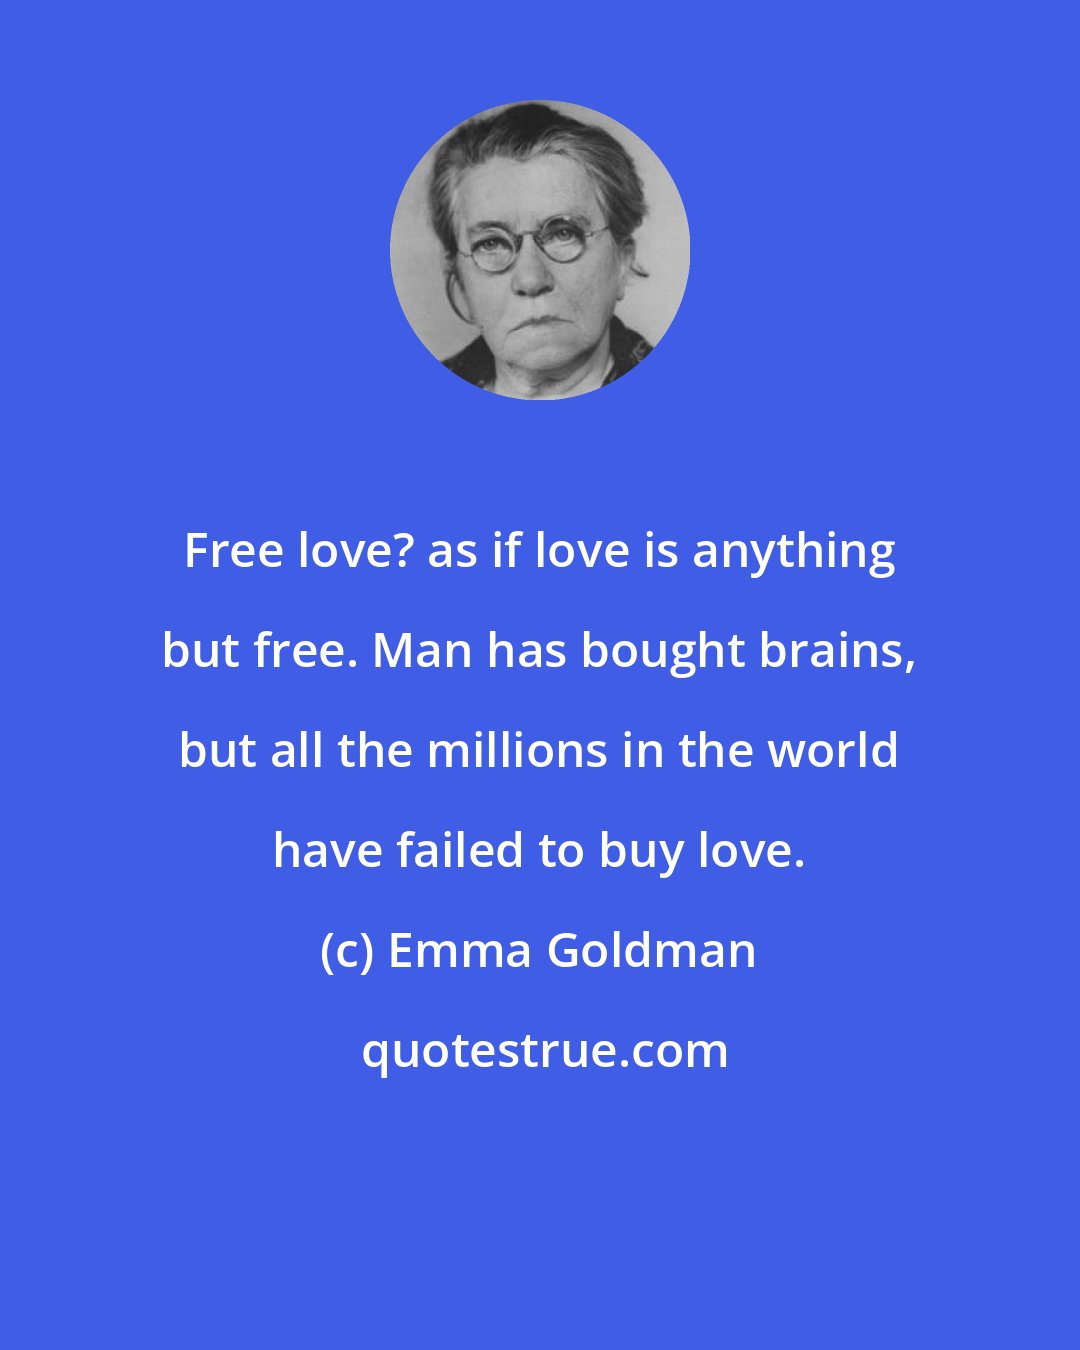 Emma Goldman: Free love? as if love is anything but free. Man has bought brains, but all the millions in the world have failed to buy love.